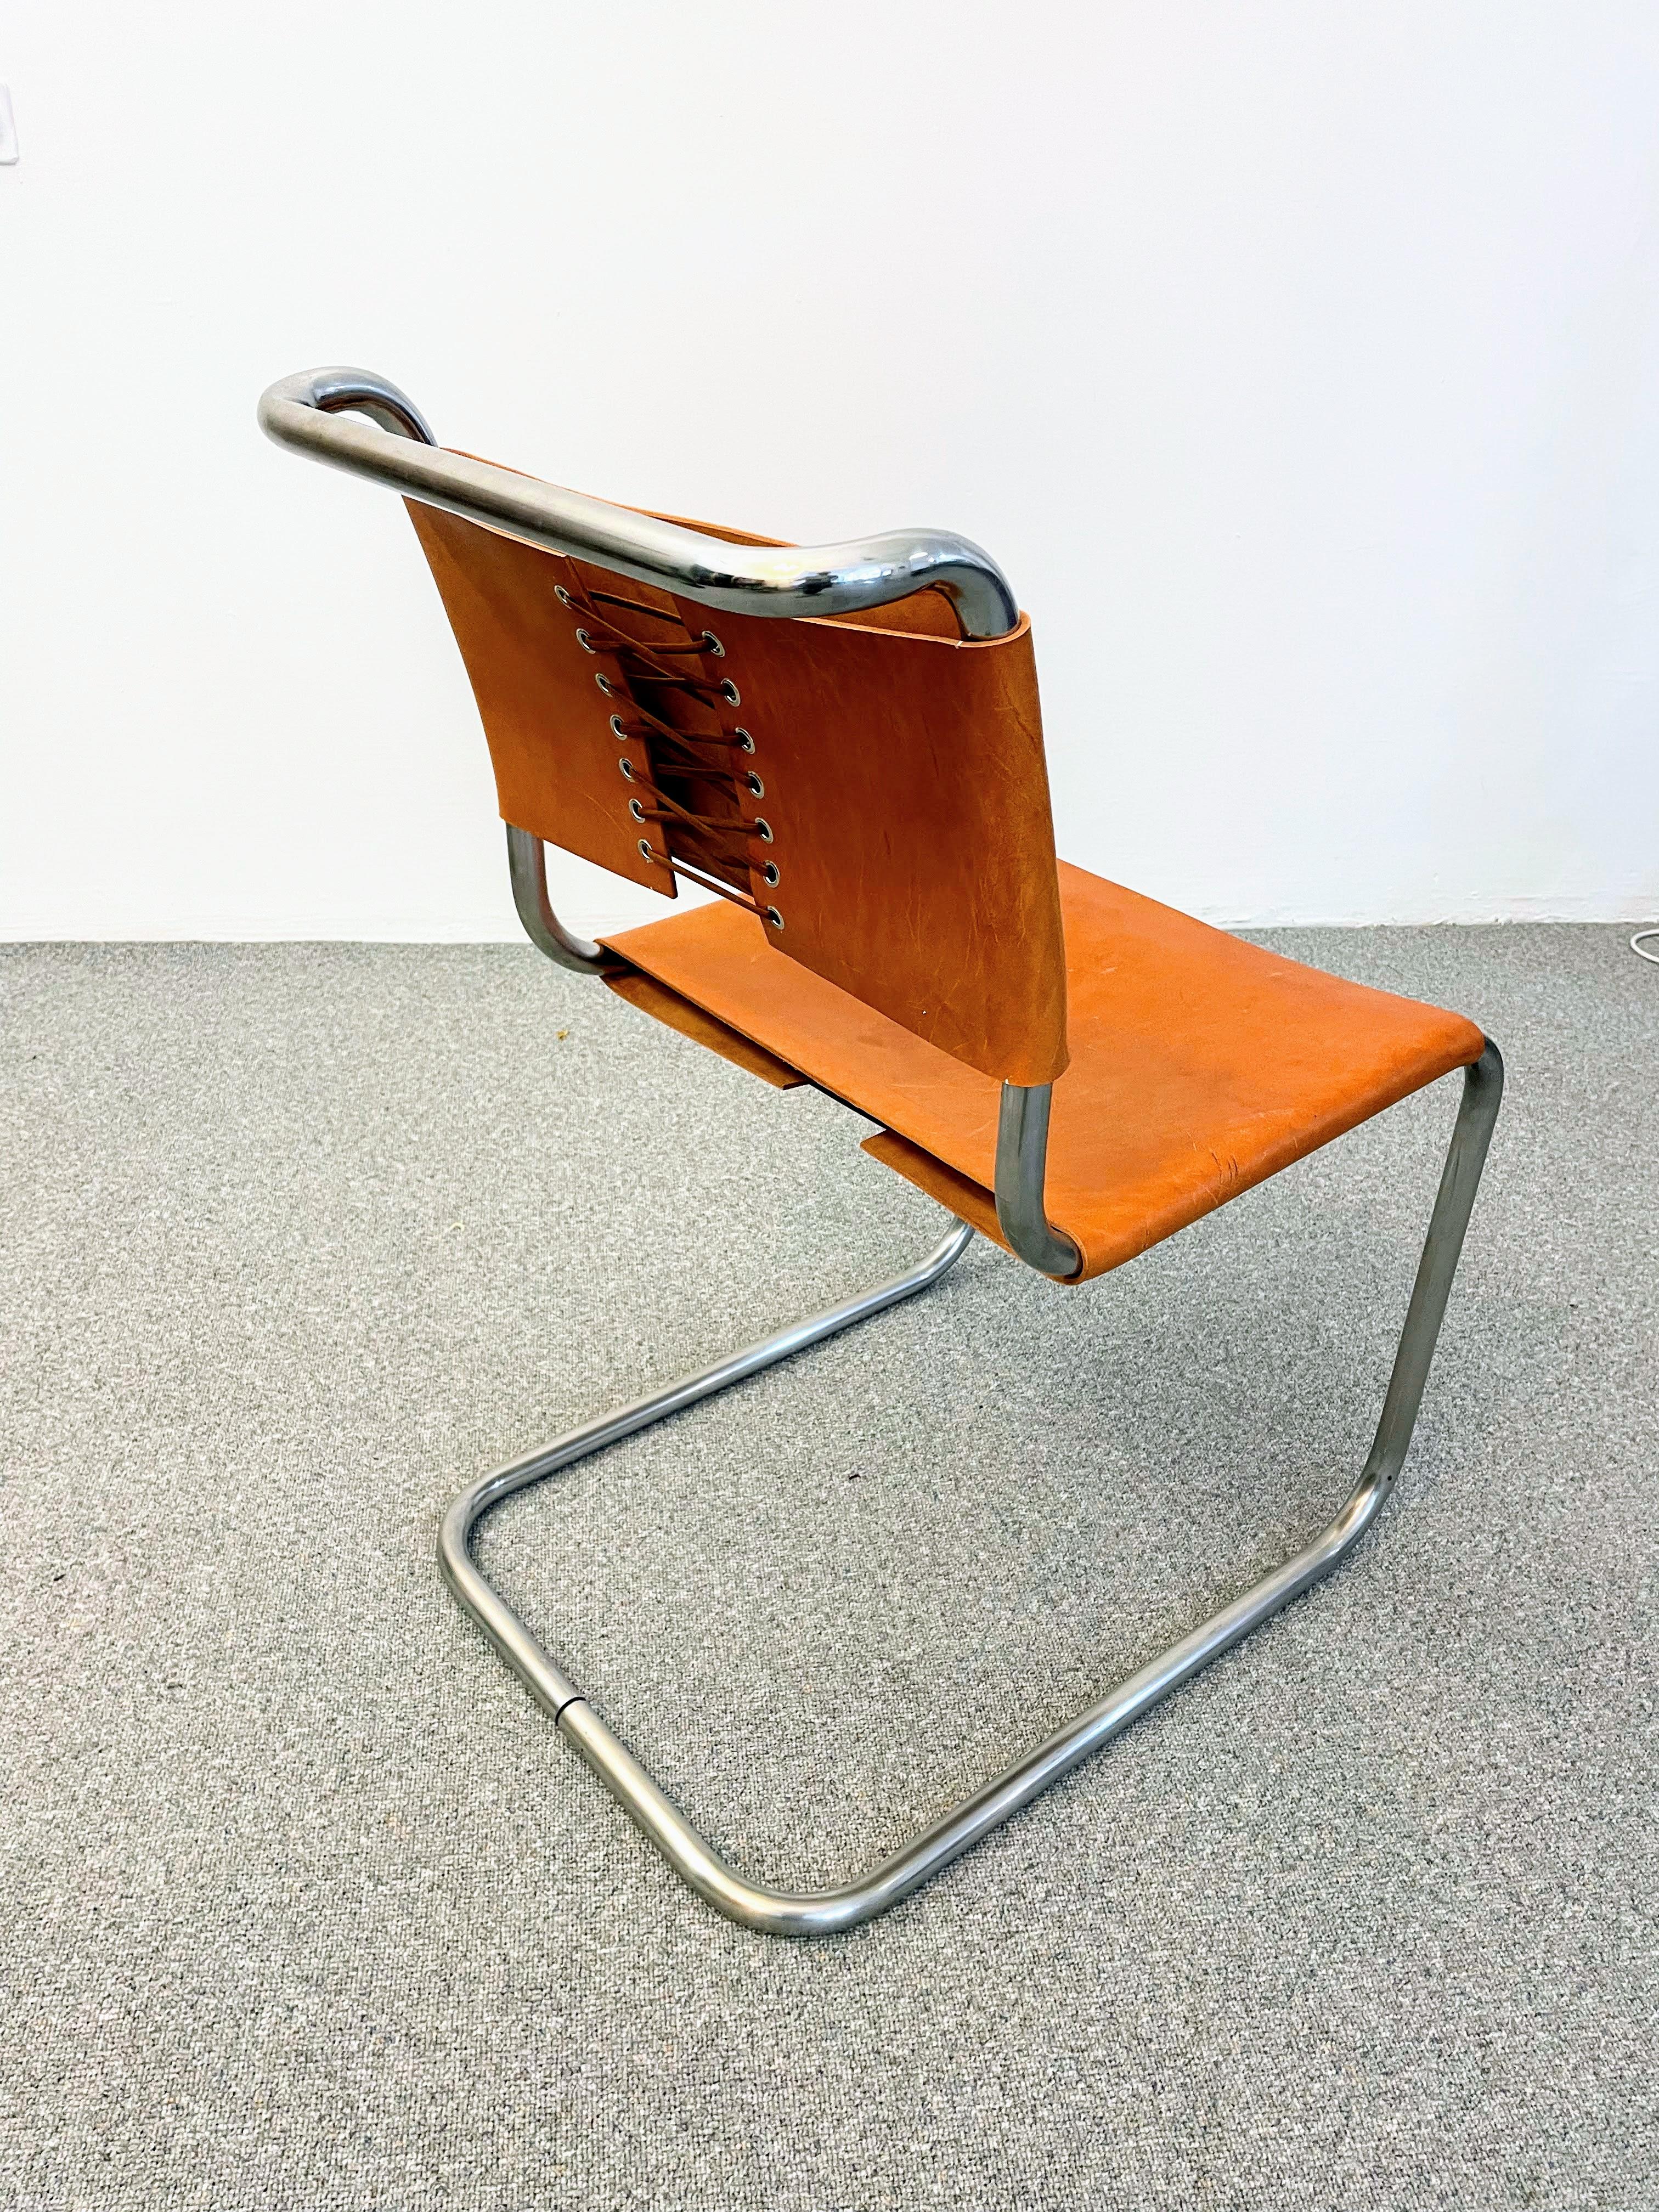 Steel B33 Cantilevered Chair by Marcel Breuer